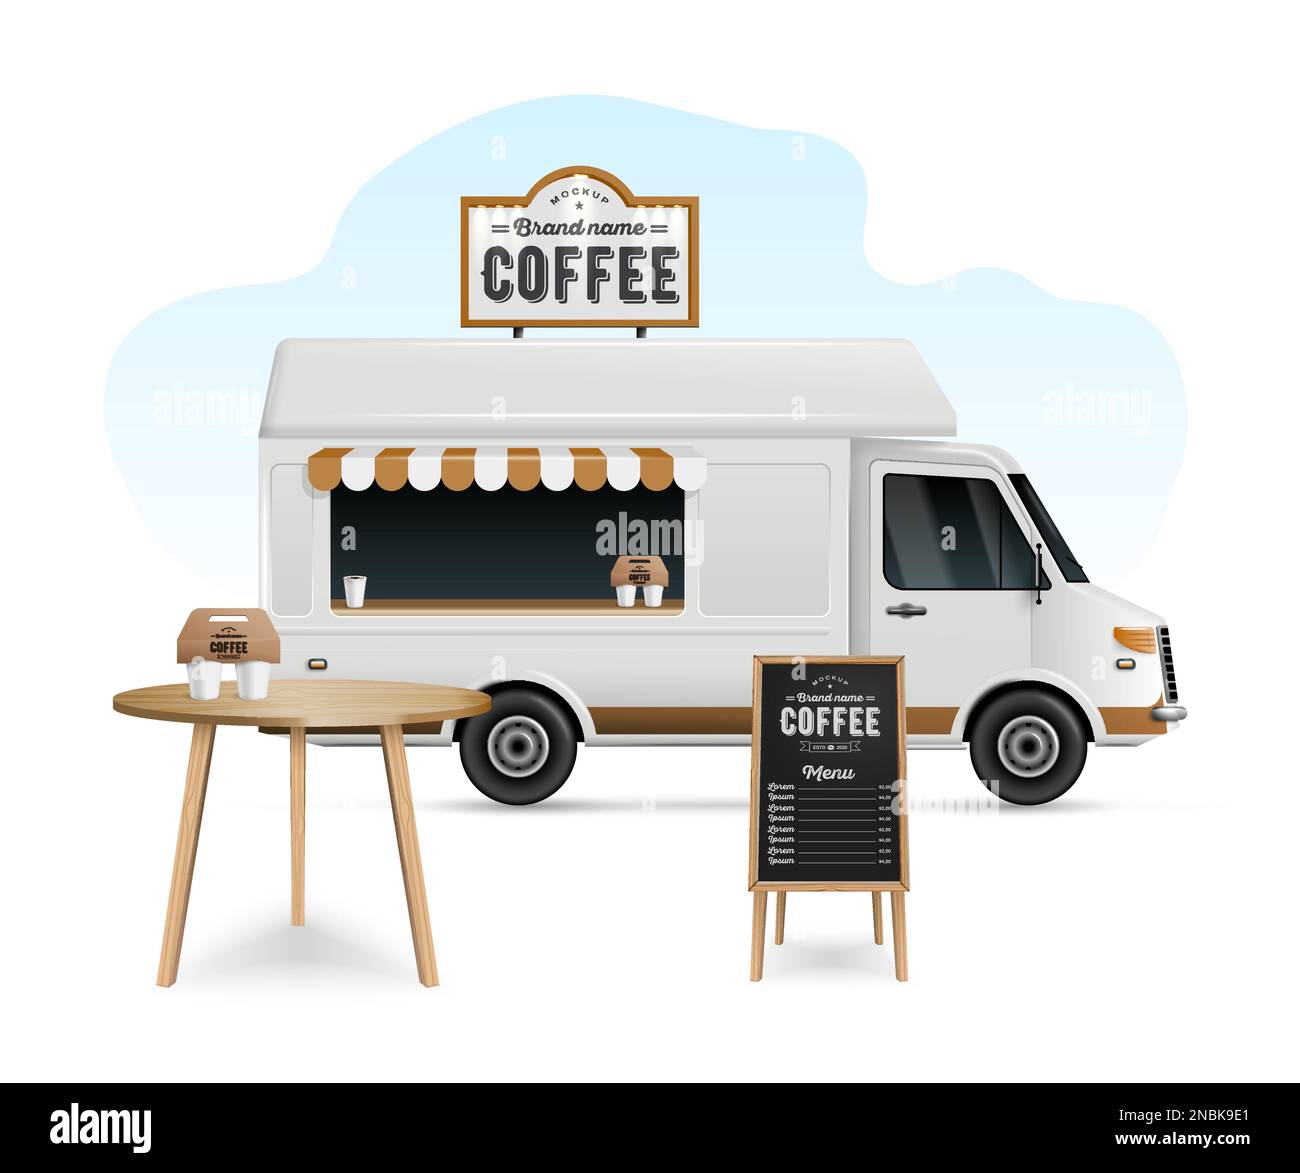 https://c8.alamy.com/comp/2NBK9E1/realistic-coffee-shop-food-truck-template-with-table-and-menu-board-vector-illustration-2NBK9E1.jpg